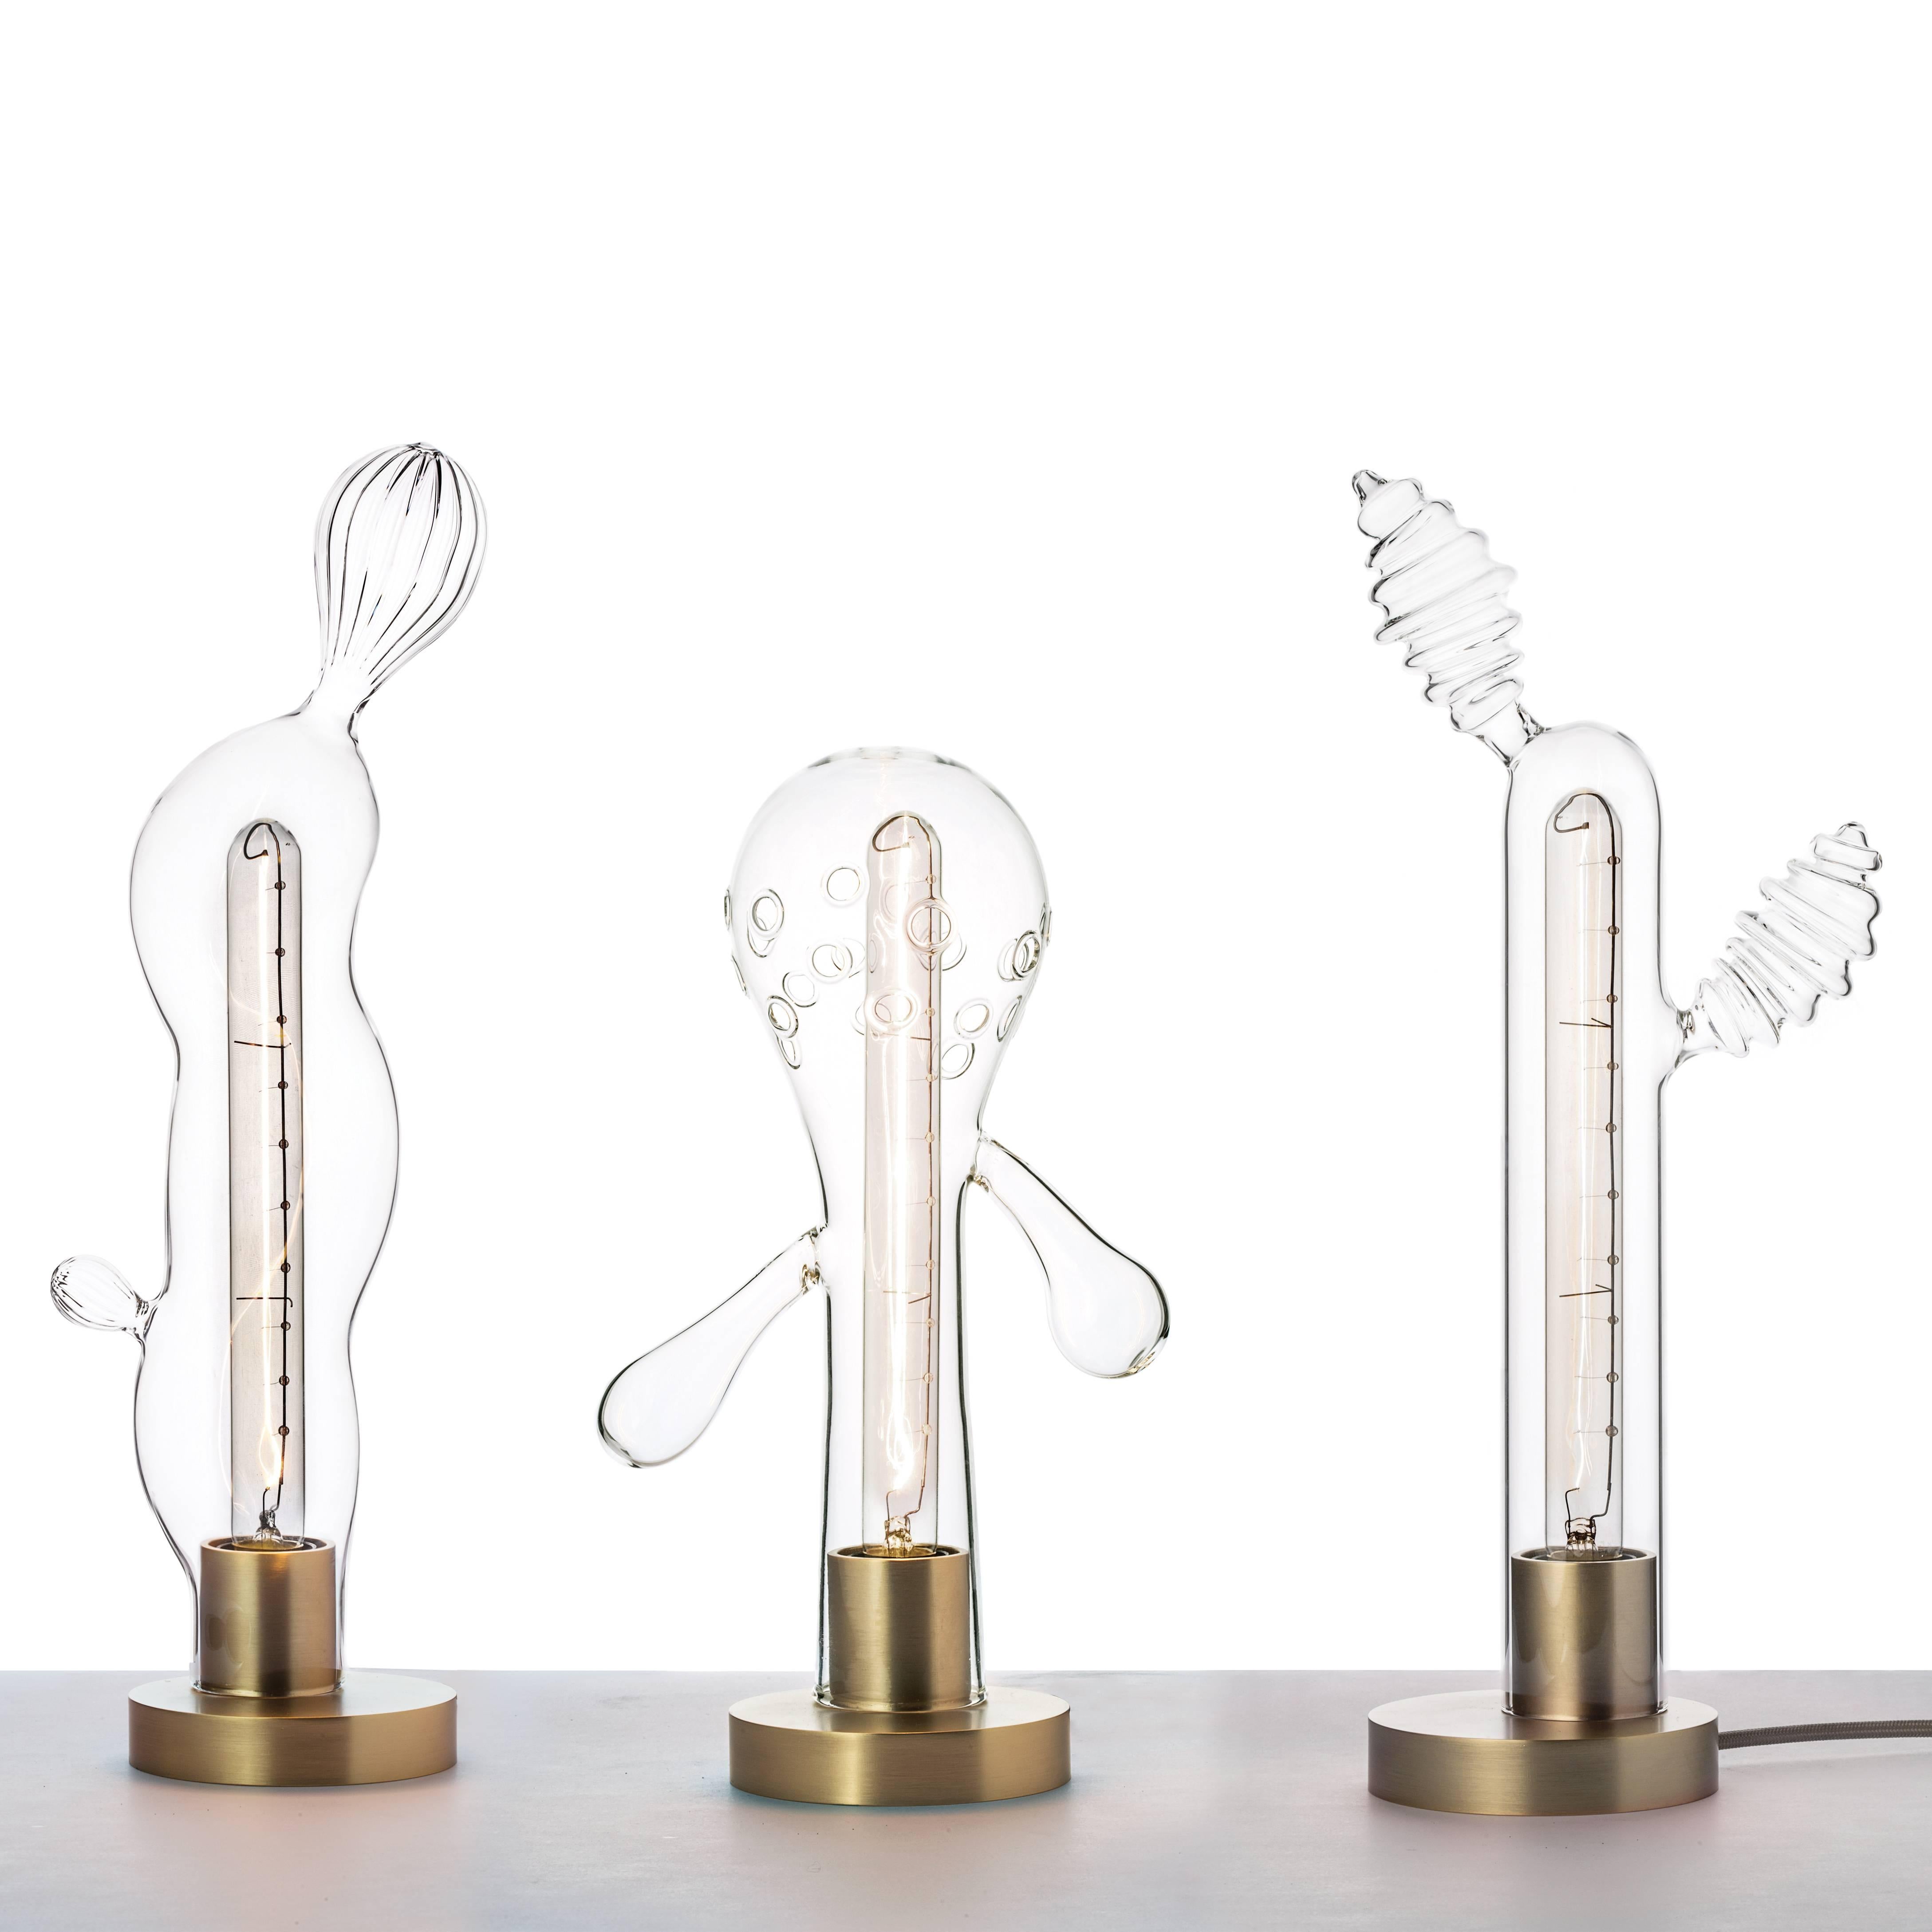 Transgenic lights by Matteo Cibic is a series of three table lamps. The glass structures are inspired by the plant kingdom’s shapes, recognizable despite the genetic mutation process they seem to have gone through. The photosynthesis process gets